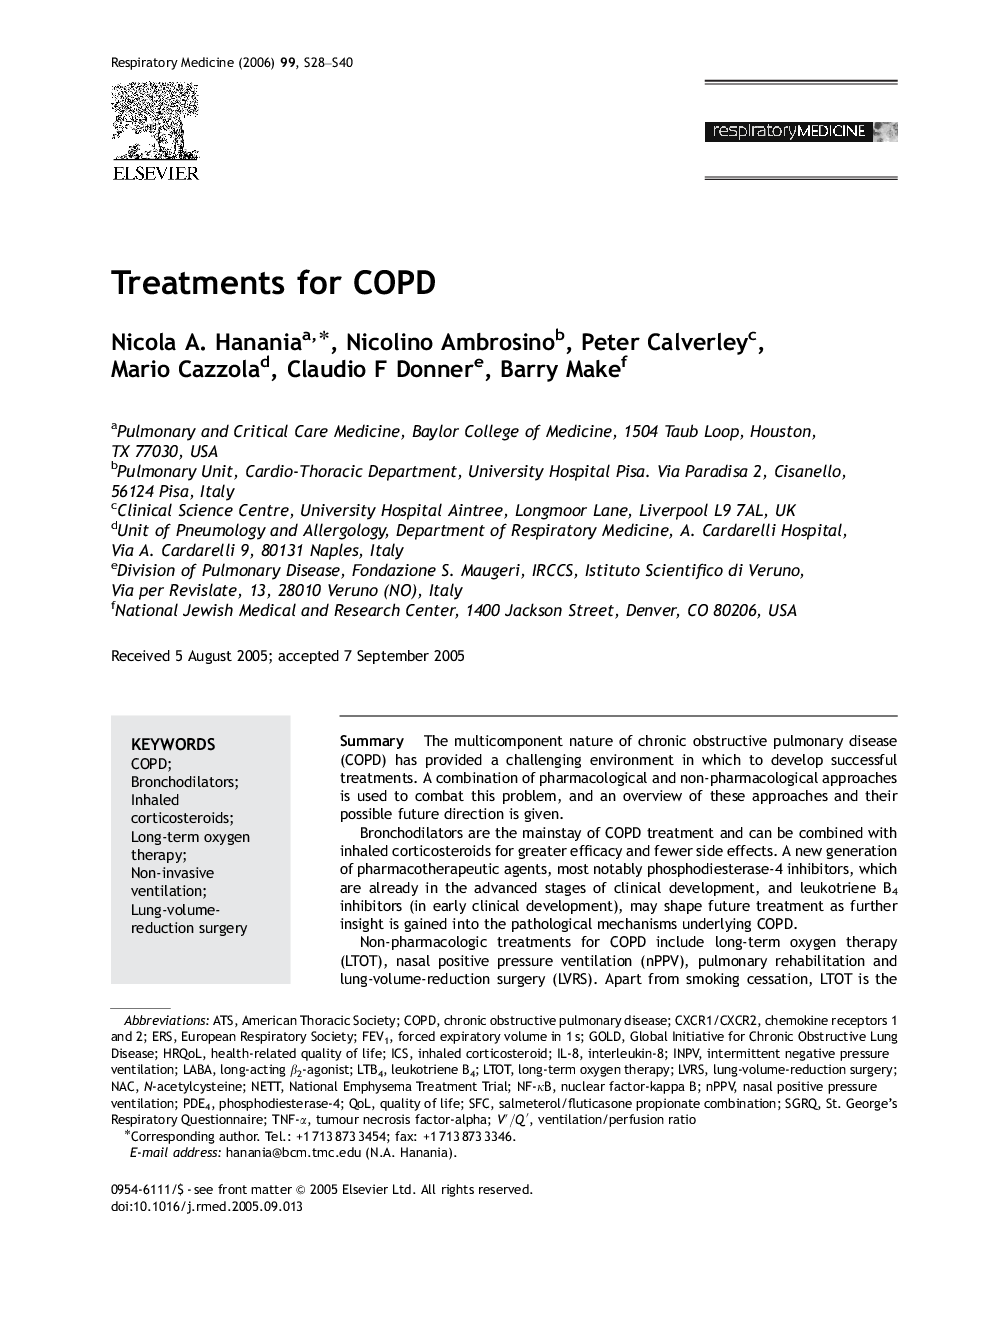 Treatments for COPD